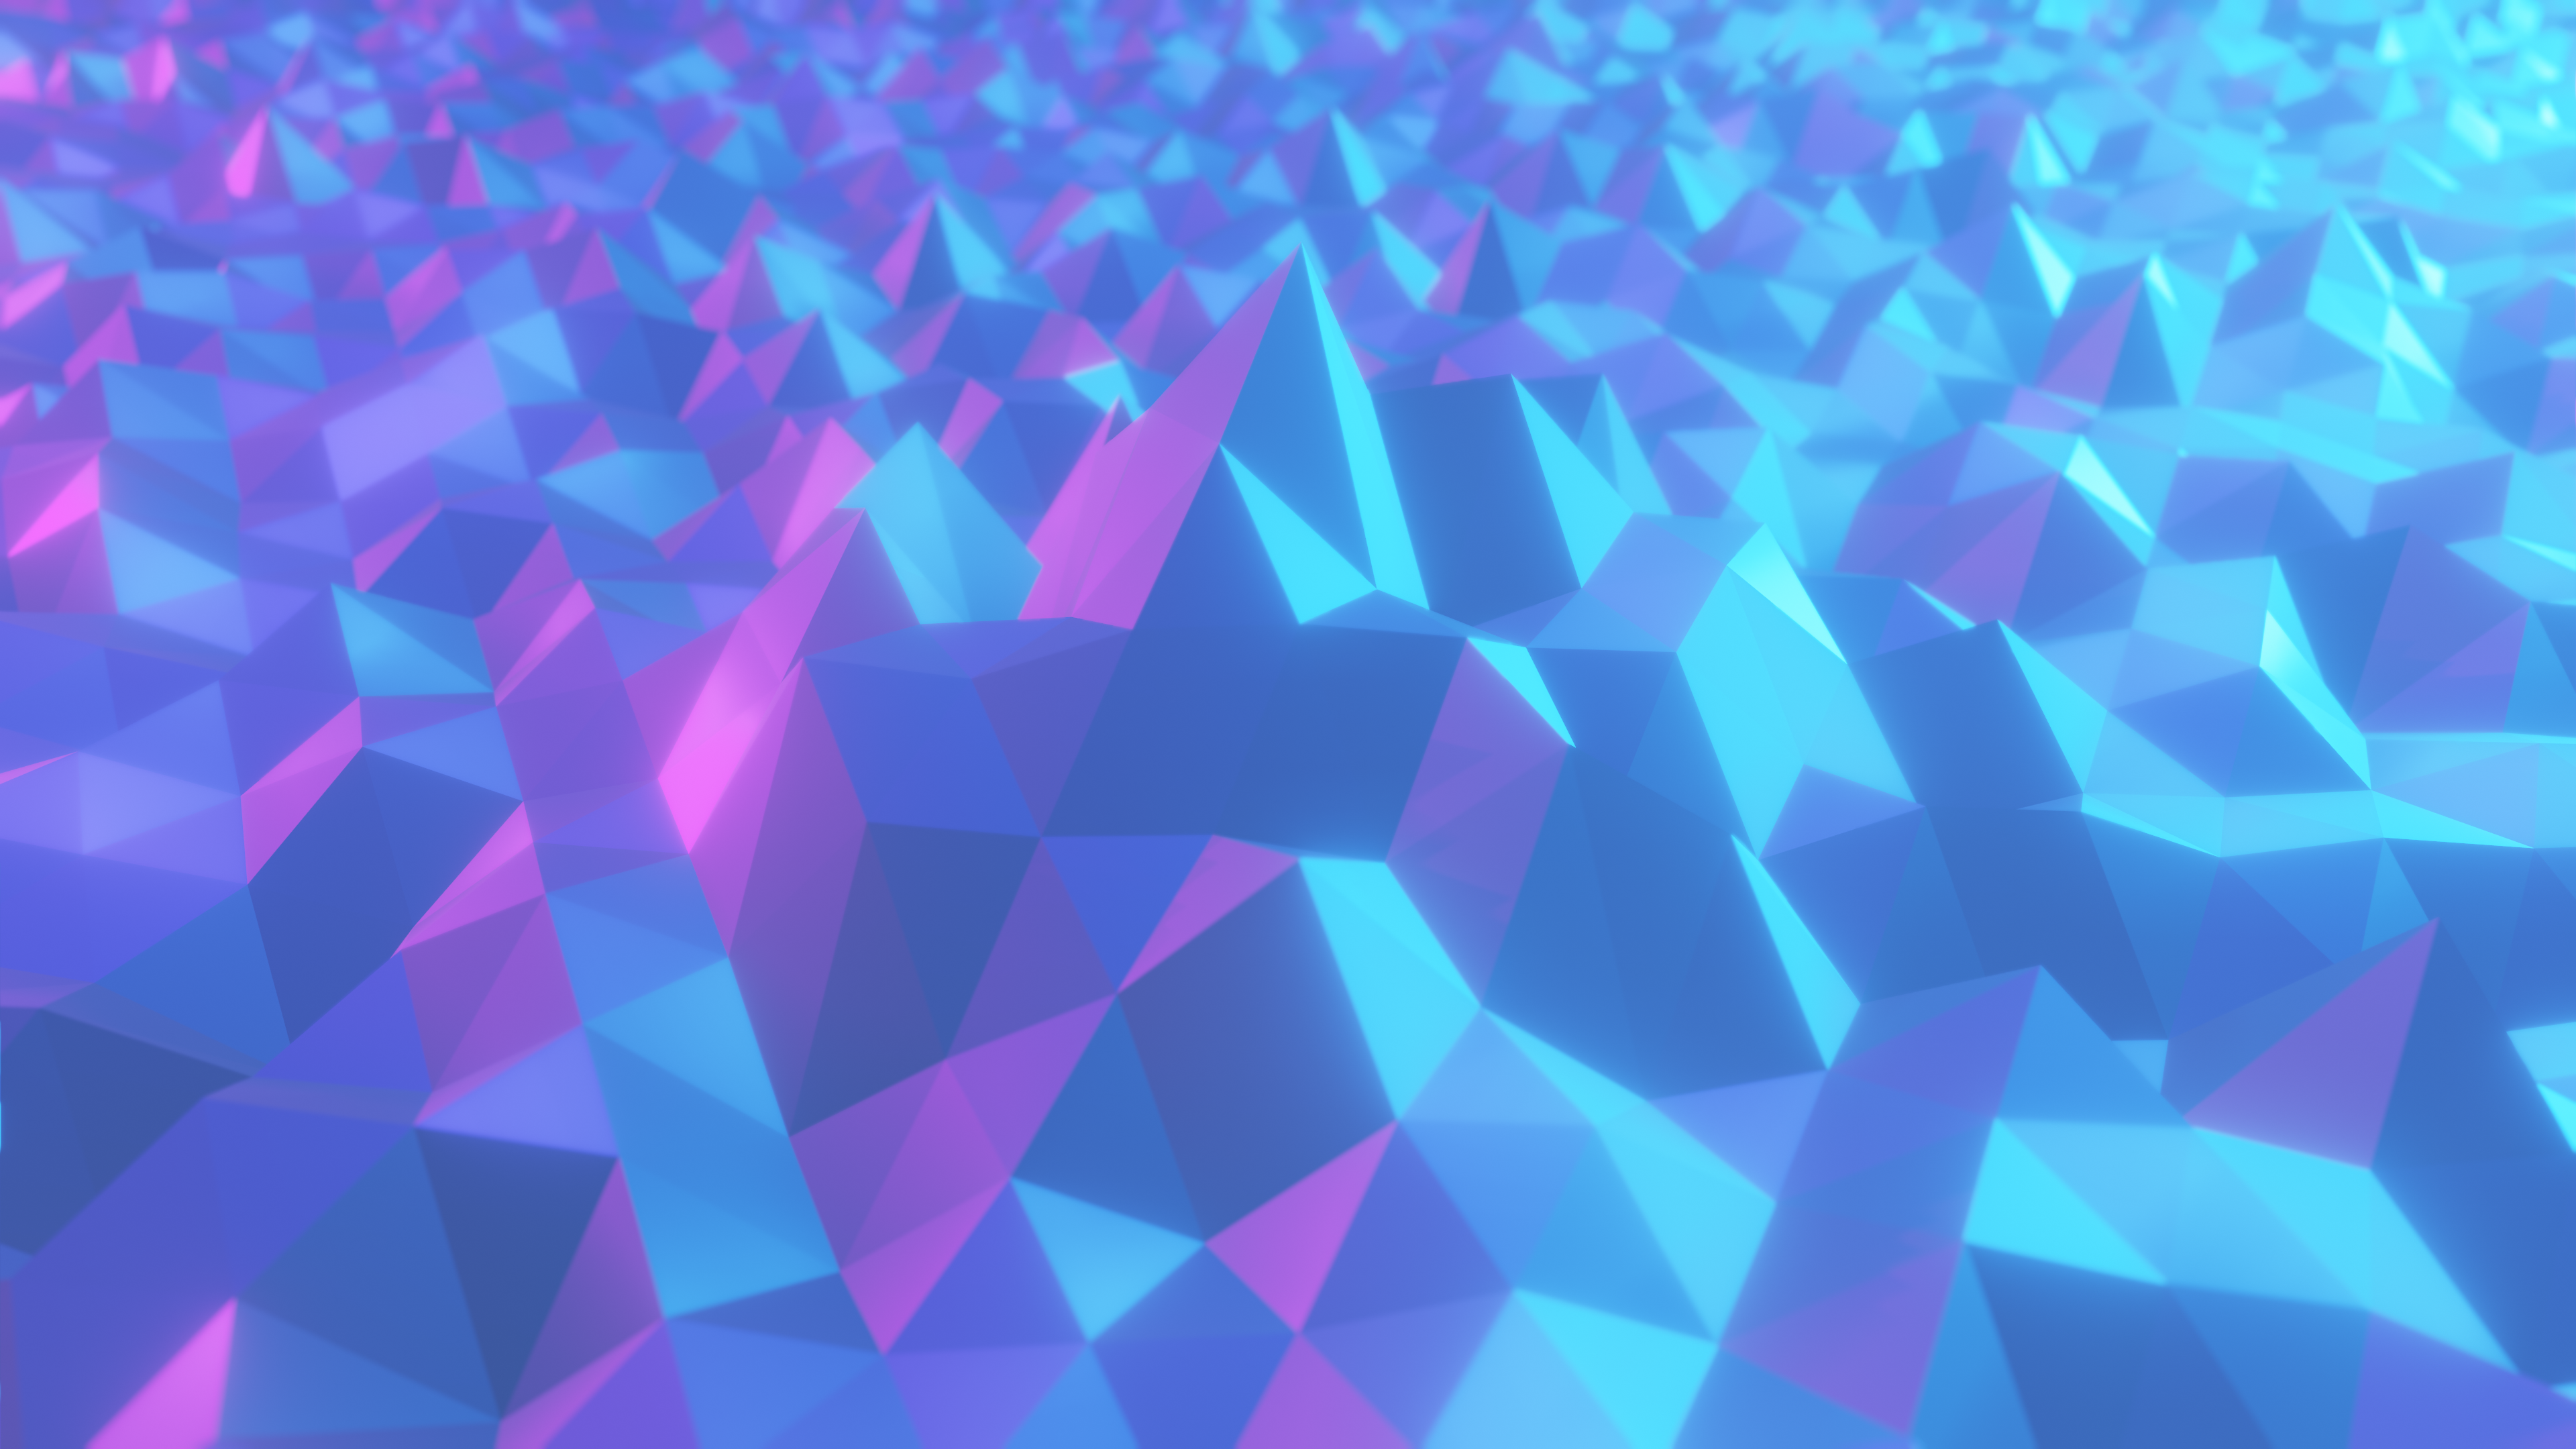 Abstract Low Poly Digital Art Turquise 3840x2160